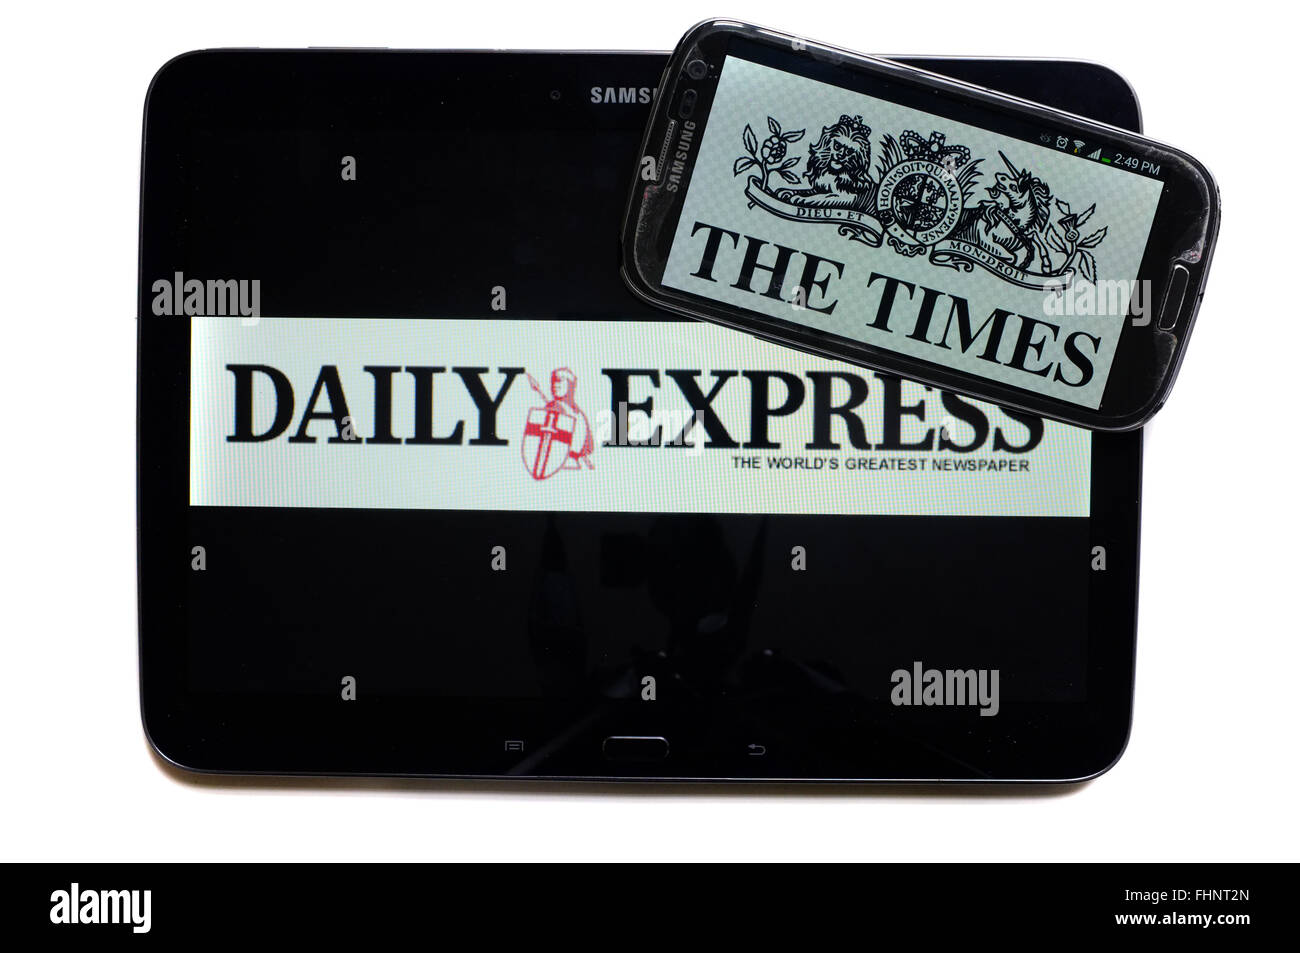 The logos of the Daily Express and The Times newspapers displayed on the screens of a tablet and a smartphone. Stock Photo